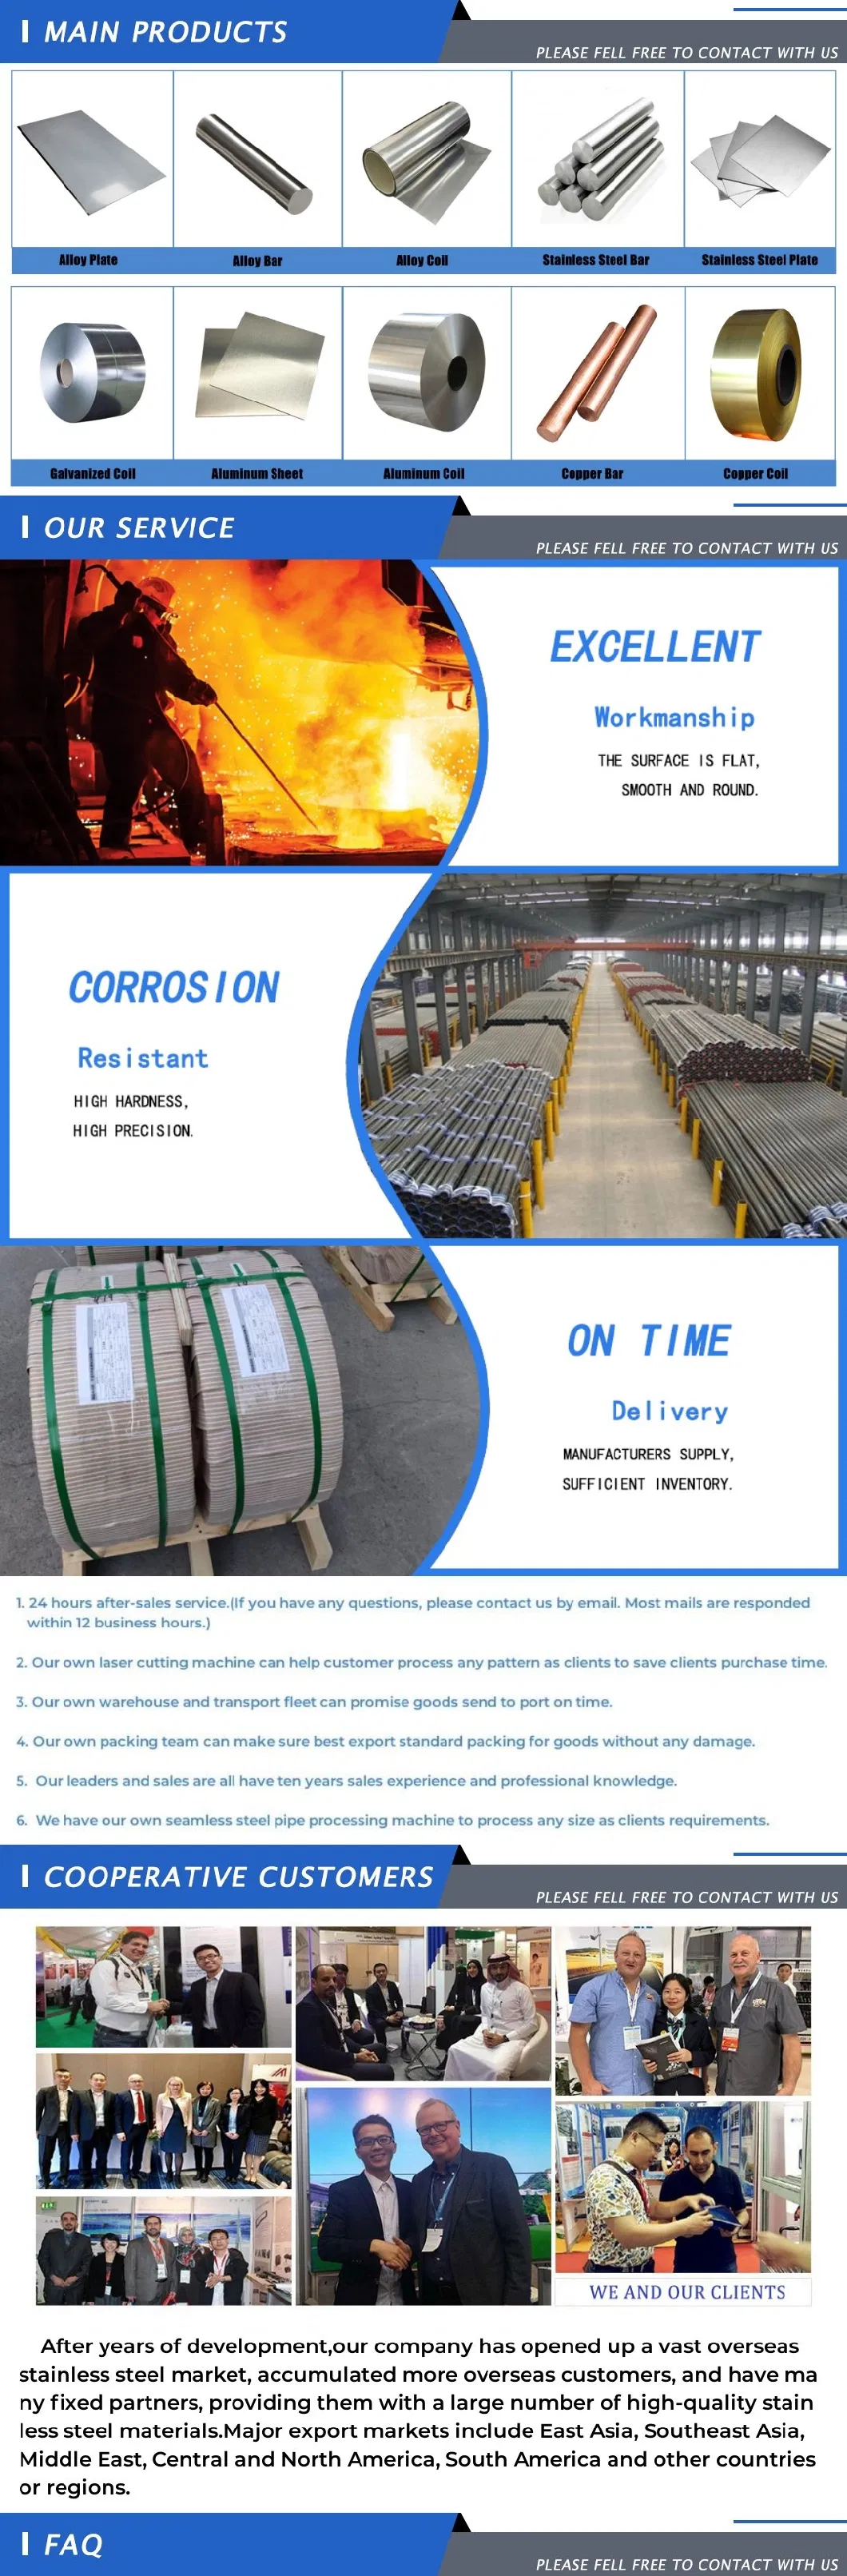 SUS304/316/1.4423/1.4301/1.4563/1.4369/1.4550 /1.4373 Stainless Steel Rod/Sheet/Coil/Pipe Corrosion Prevention